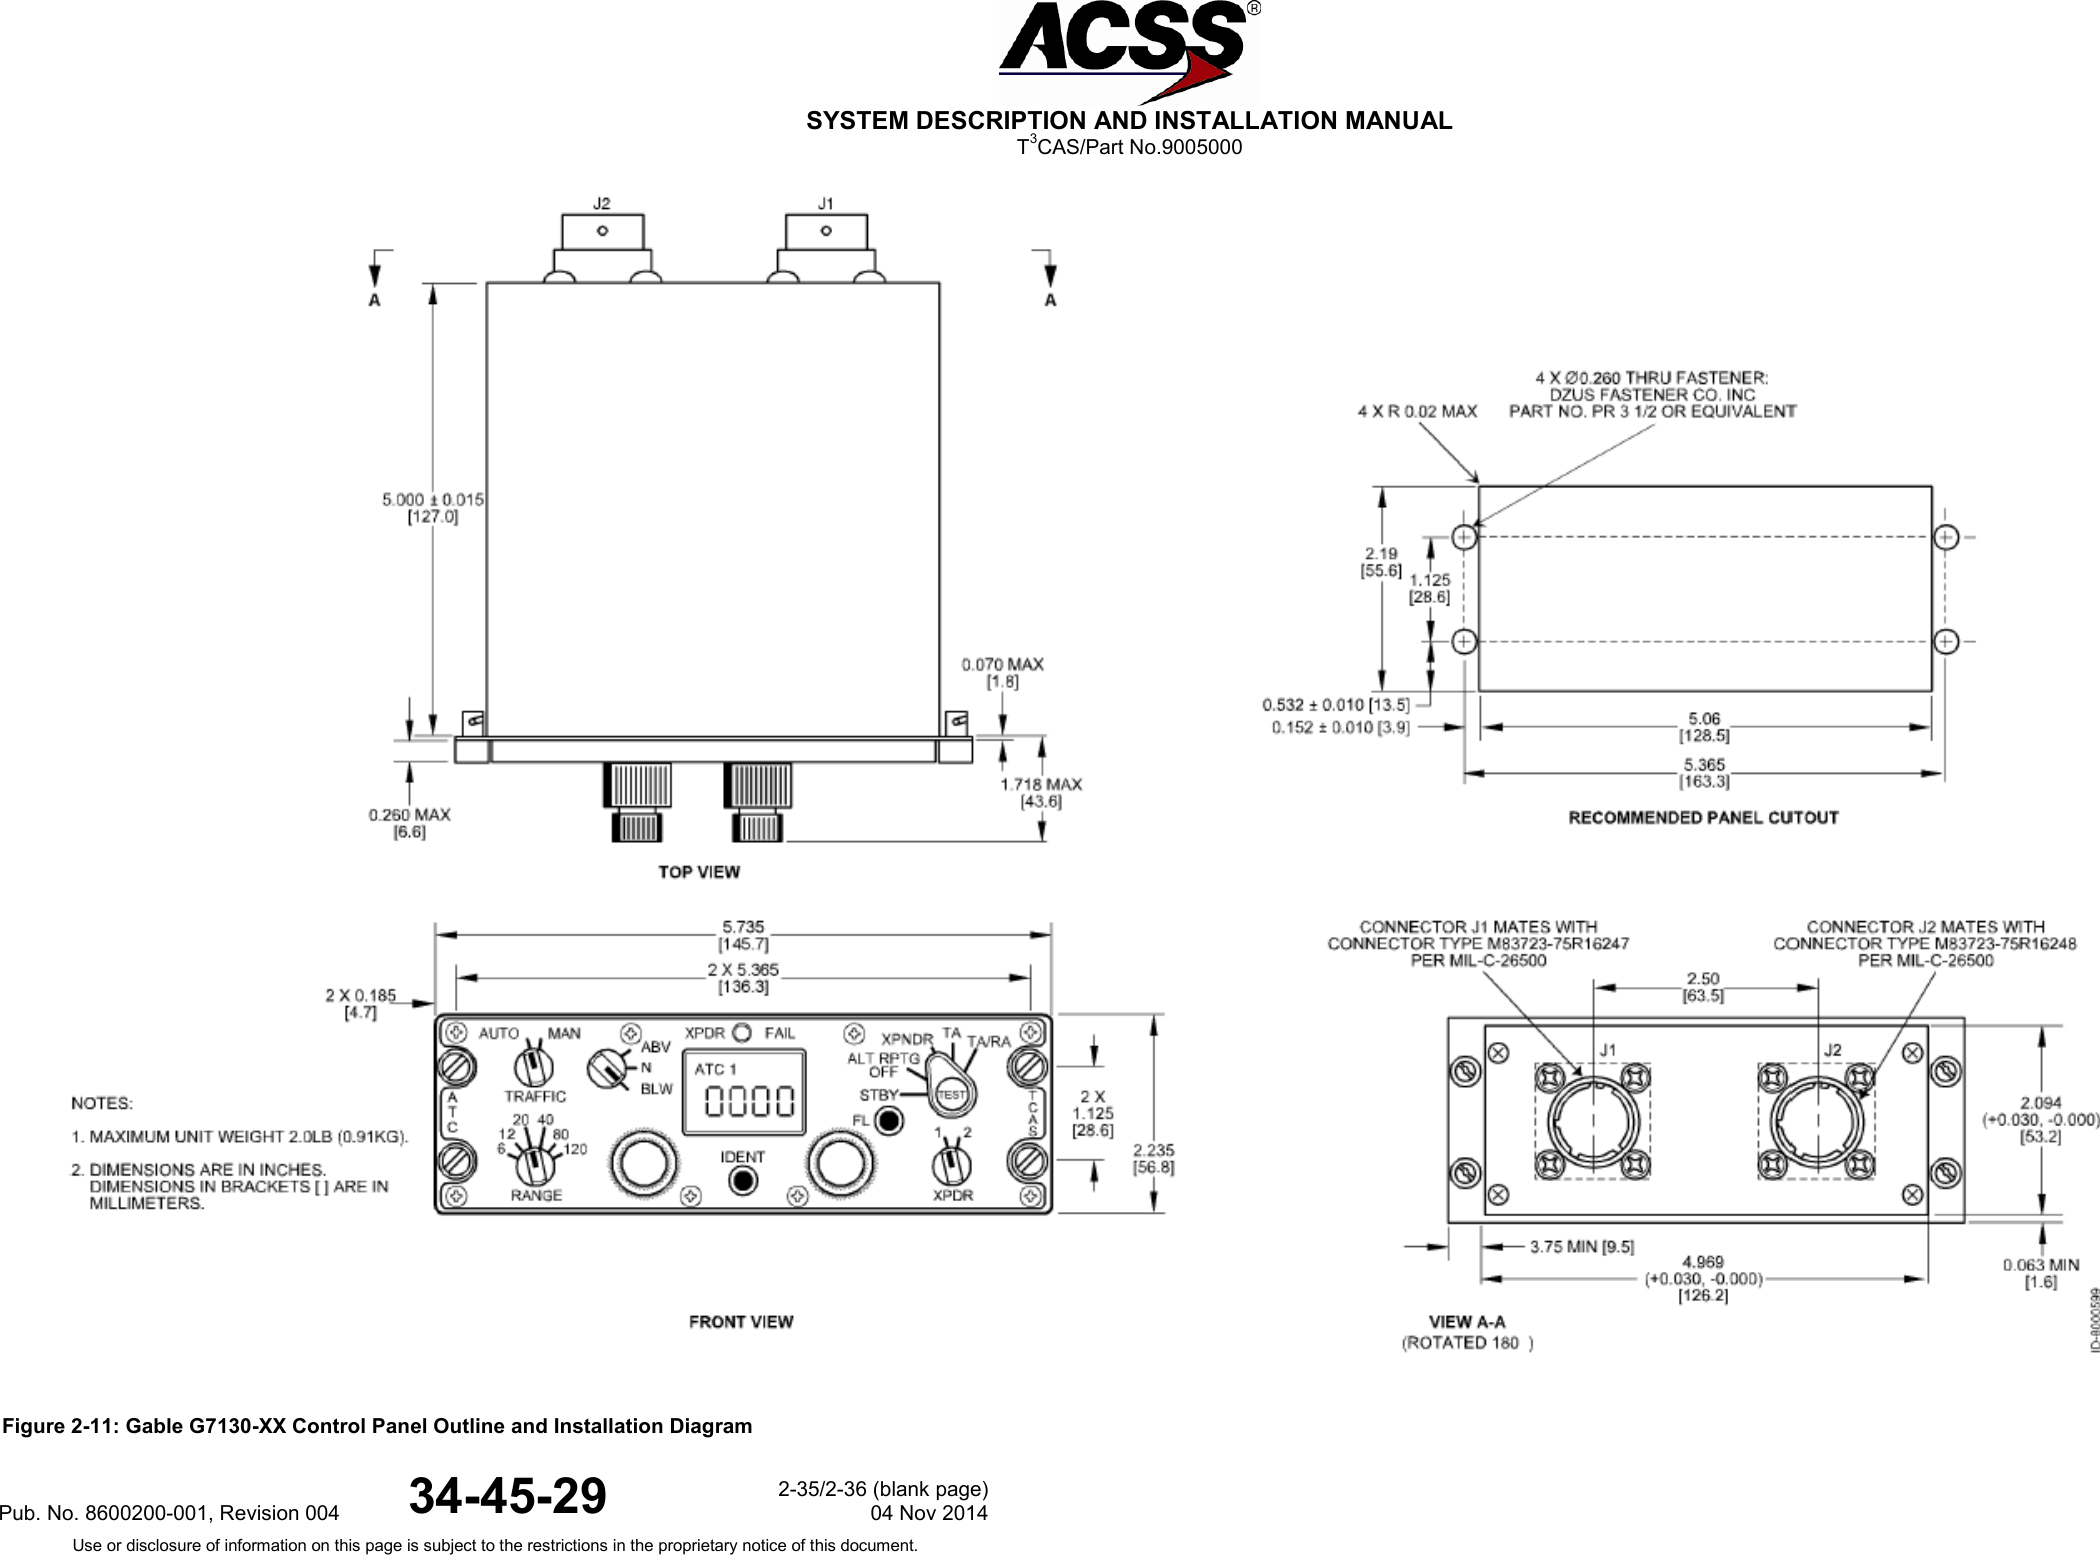  SYSTEM DESCRIPTION AND INSTALLATION MANUAL T3CAS/Part No.9005000  Figure 2-11: Gable G7130-XX Control Panel Outline and Installation DiagramPub. No. 8600200-001, Revision 004 34-45-29 2-35/2-36 (blank page) 04 Nov 2014 Use or disclosure of information on this page is subject to the restrictions in the proprietary notice of this document.  